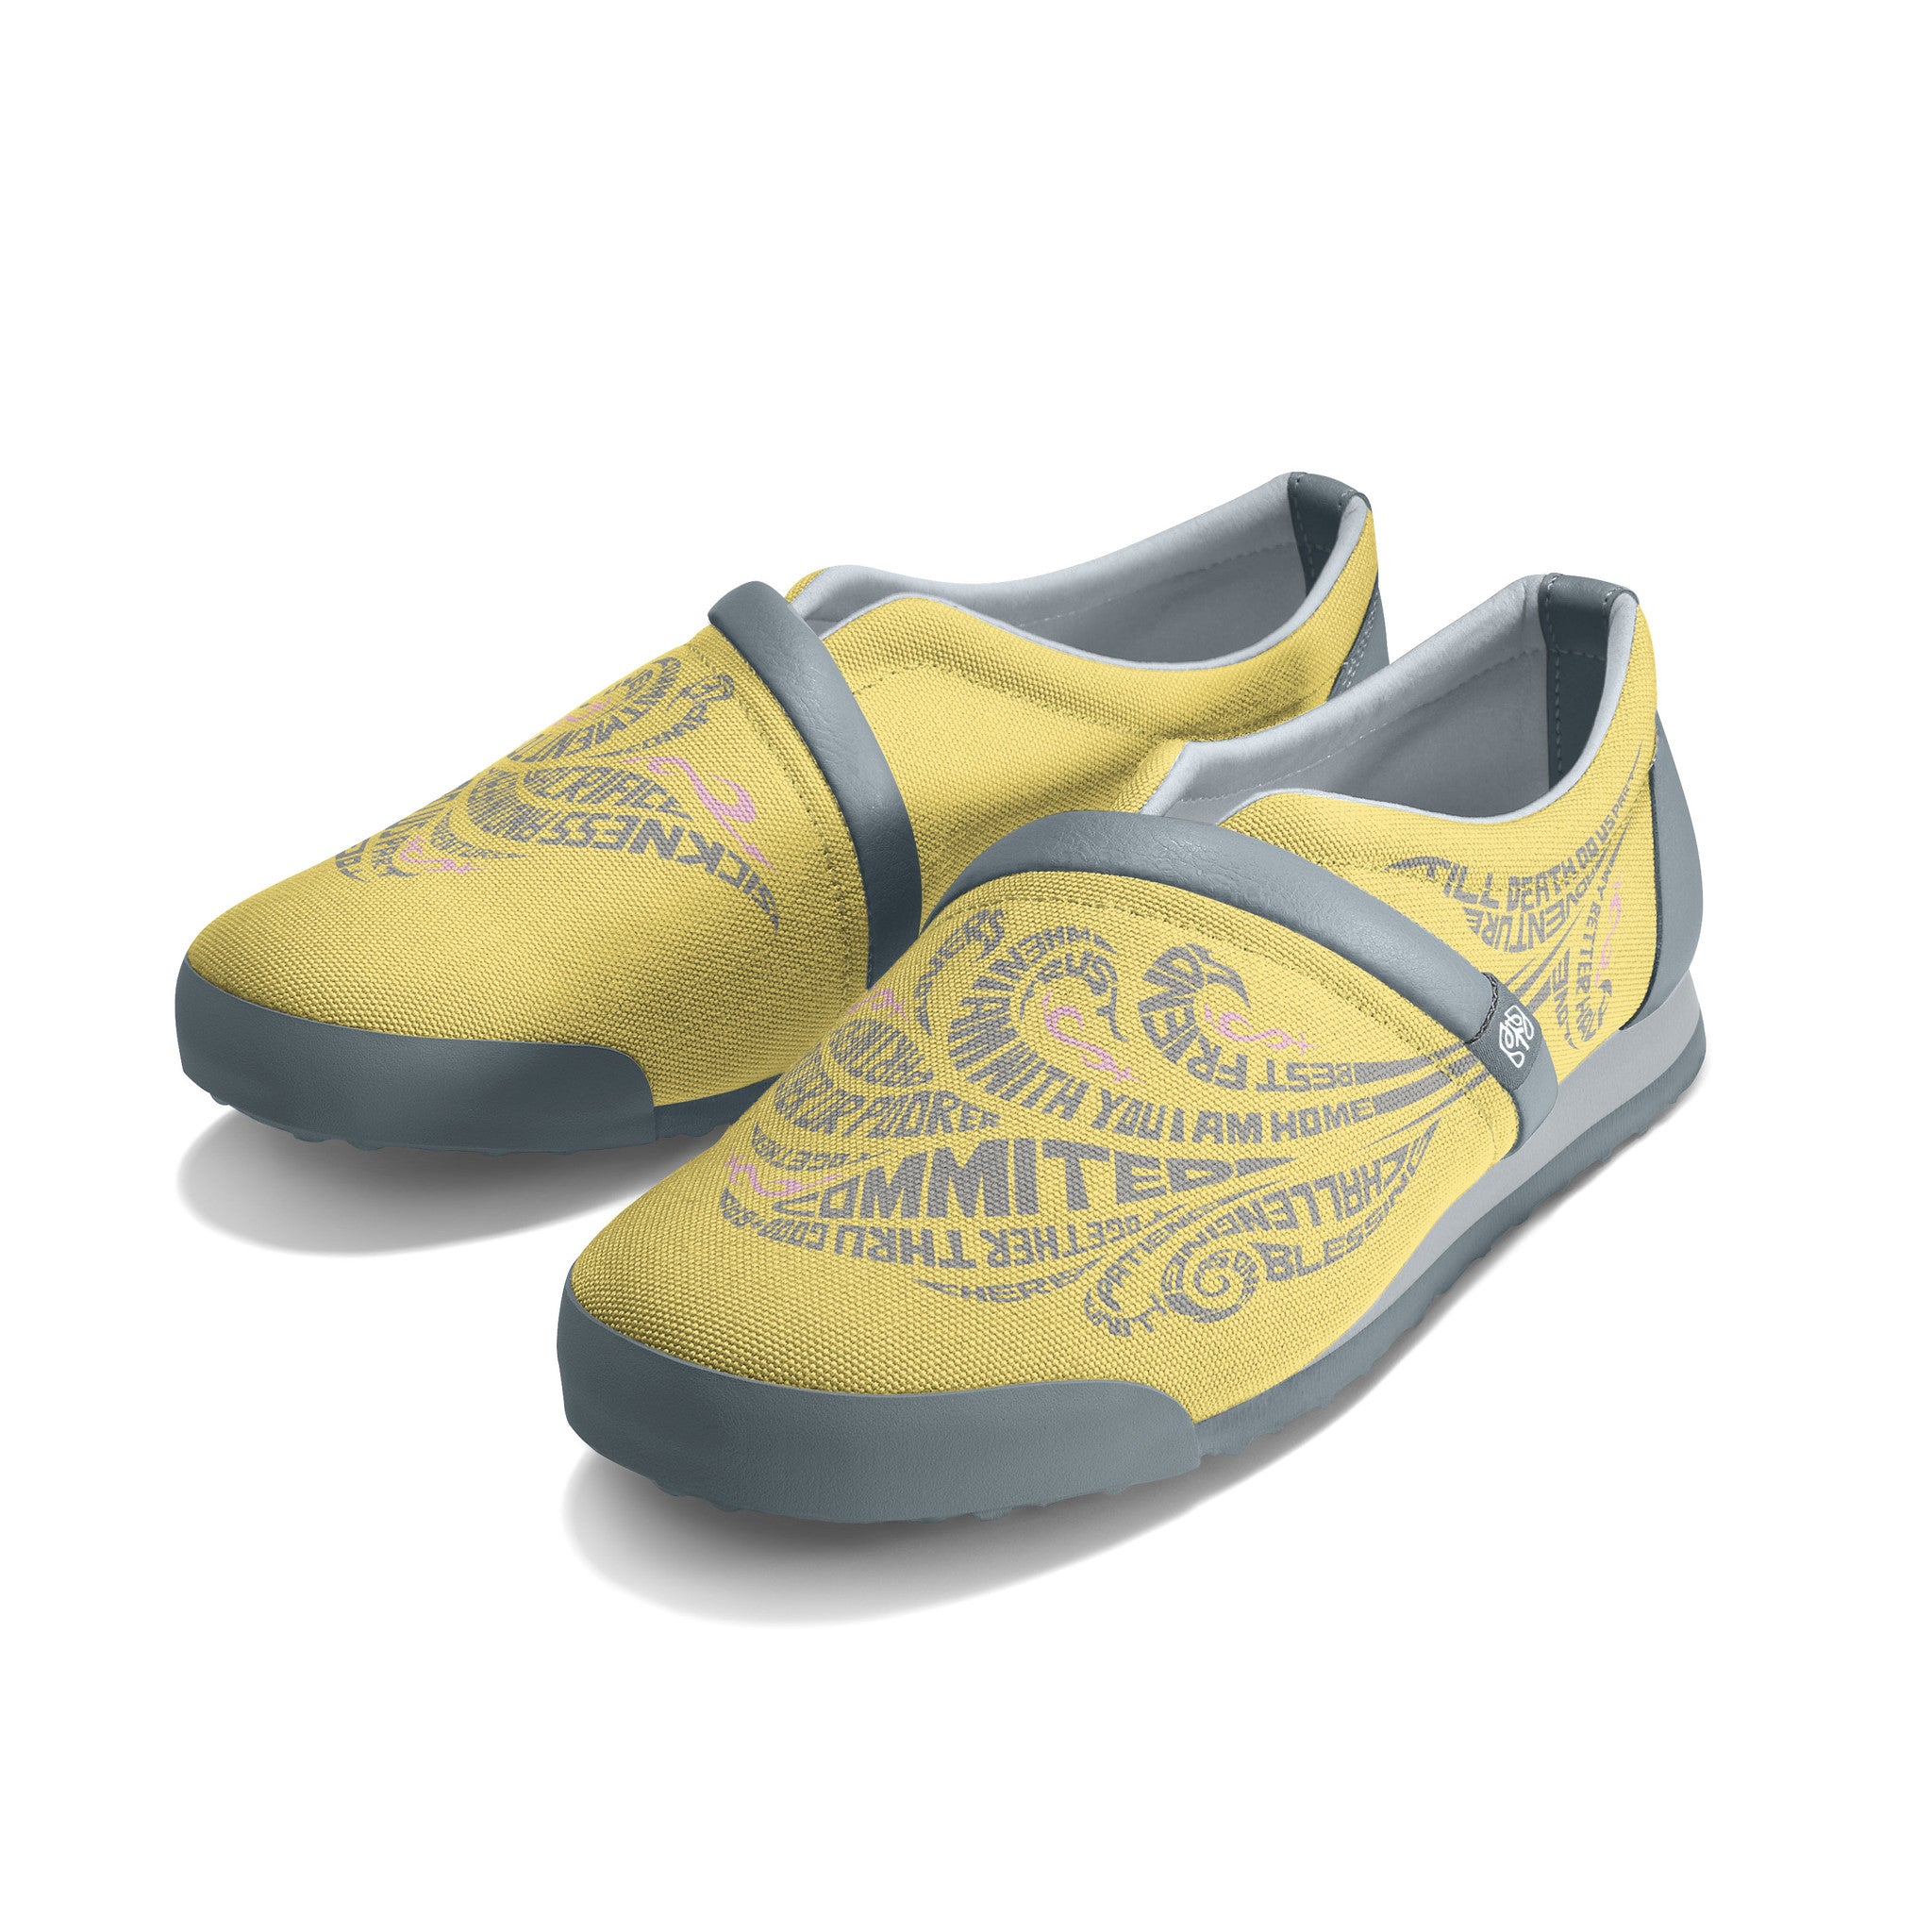 Goldfinch - Common Ground Footwear Shoes Left Perspective View